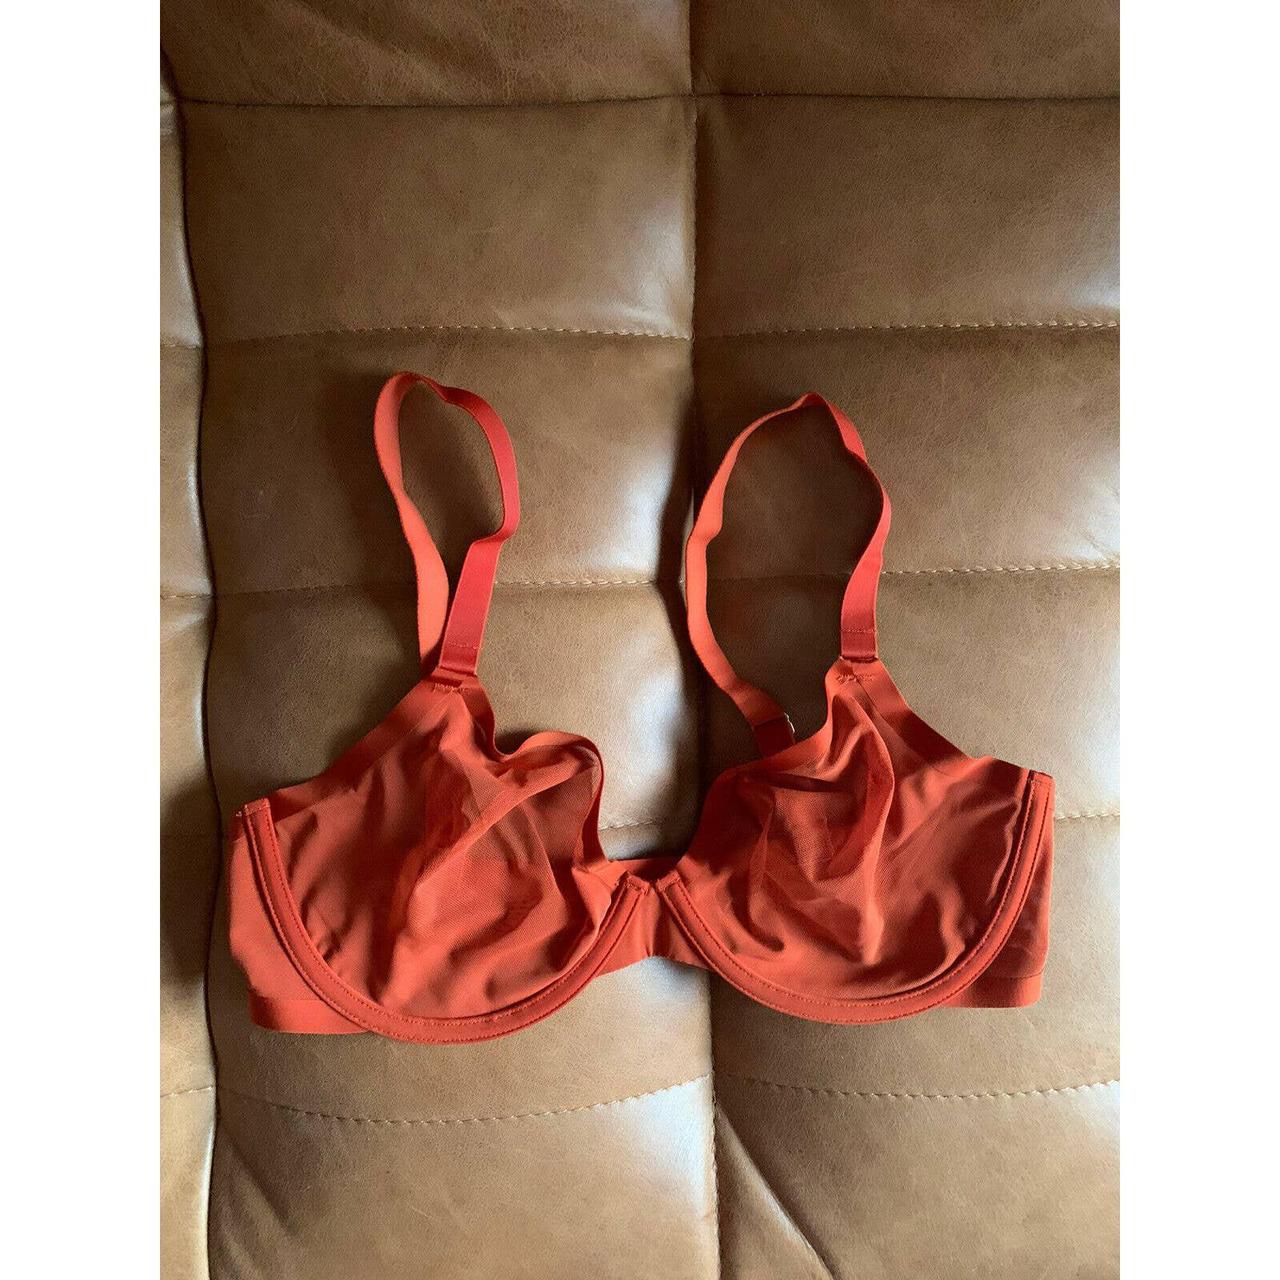 CUUP scoop bra in clay Size 36G Amazing support - Depop